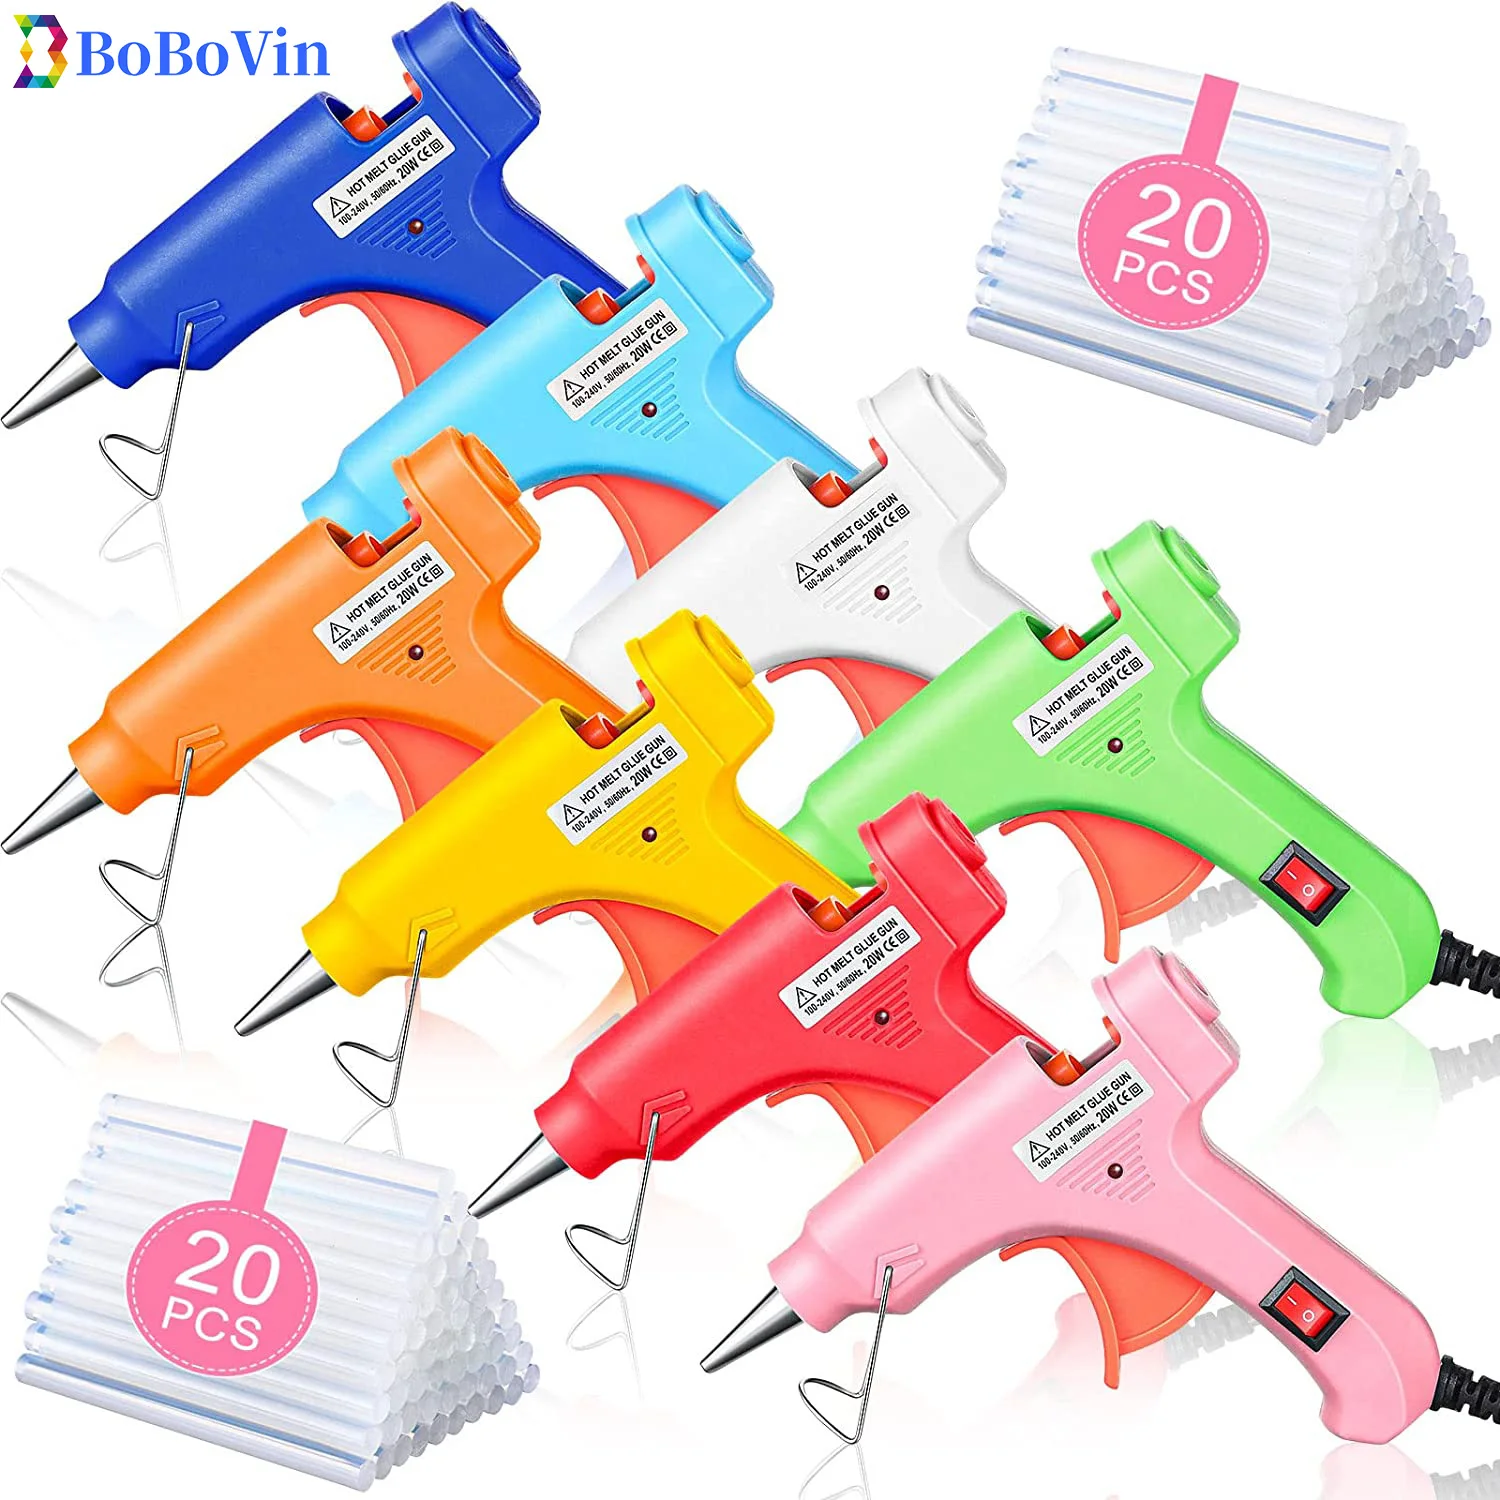 20W Mini Hot Glue Gun EU & US,  Fast Heating Melt Glue Gun For Kid Crafts School DIY Arts Home Quick Repairs Use 7mm Glue Sticks diy hand painted beads pigment curing jewelry making gel resin paint color glue drill quick drying easy use